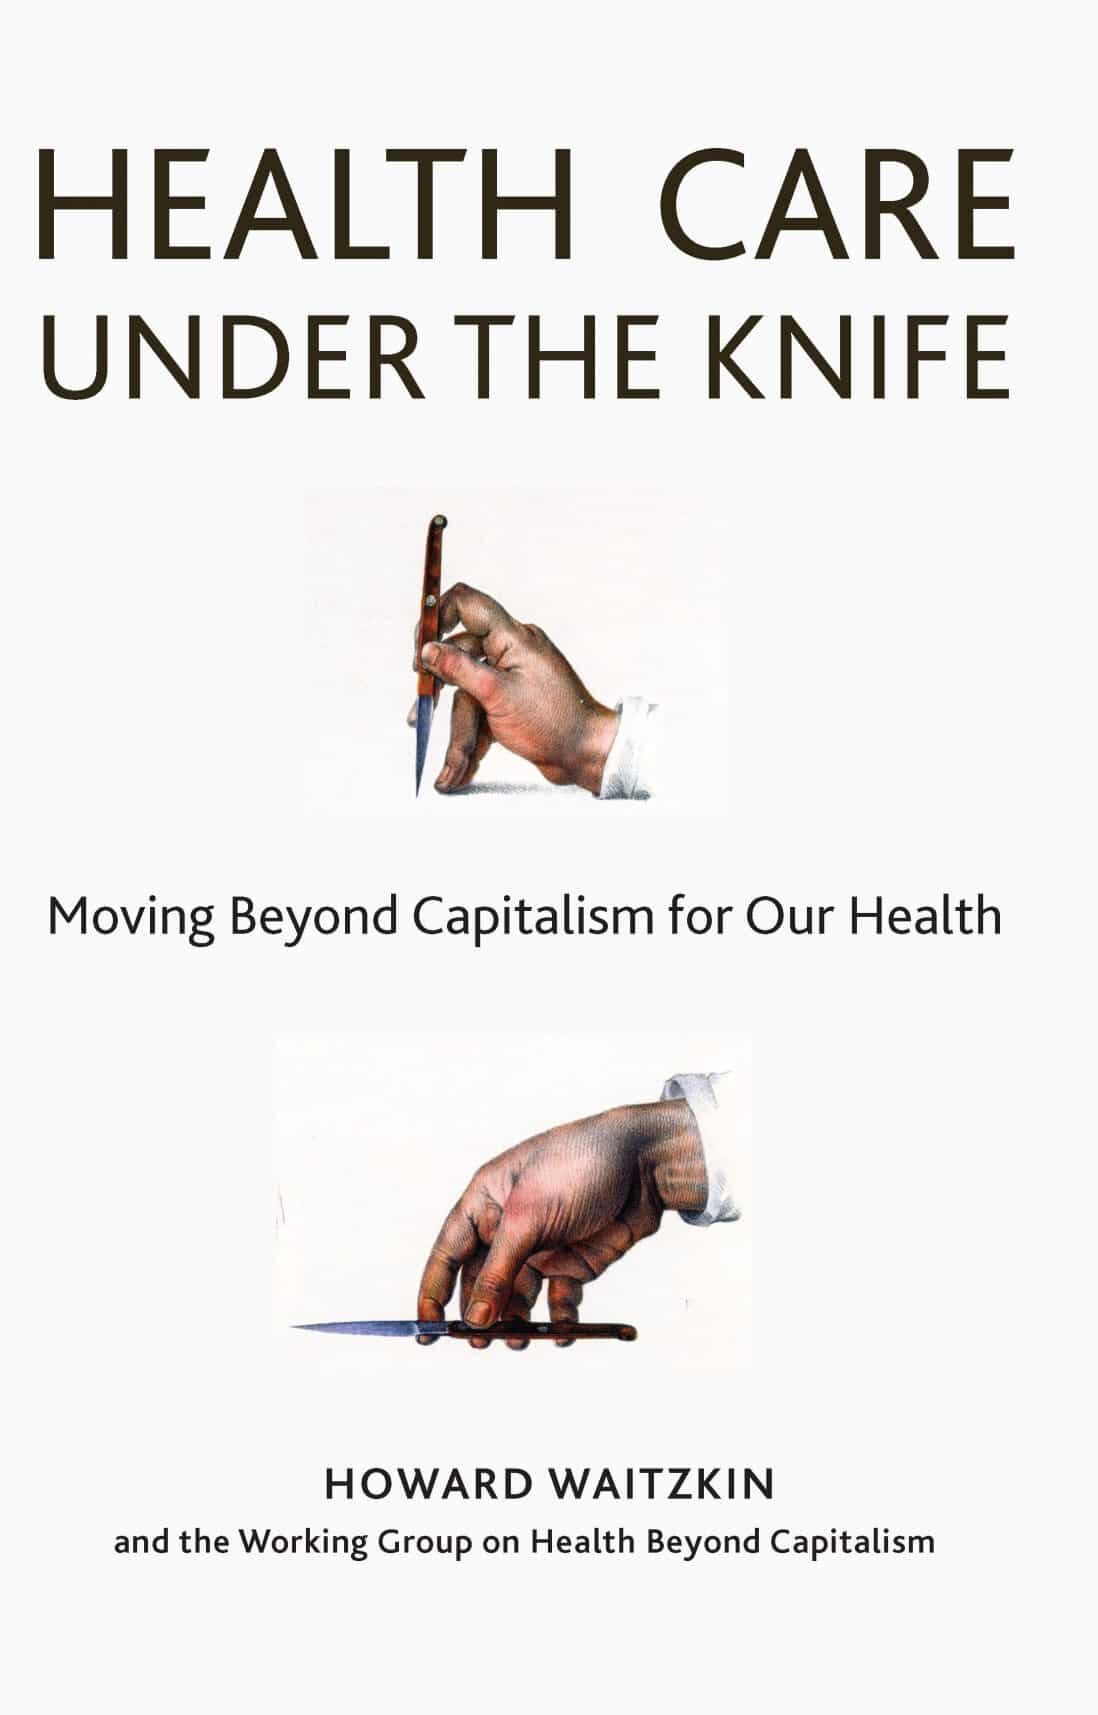  This publication explains how health care systems in capitalism contribute to some of the conditions they are supposedly meant to counteract, as health care itself is an important domain of capital accumulation. 